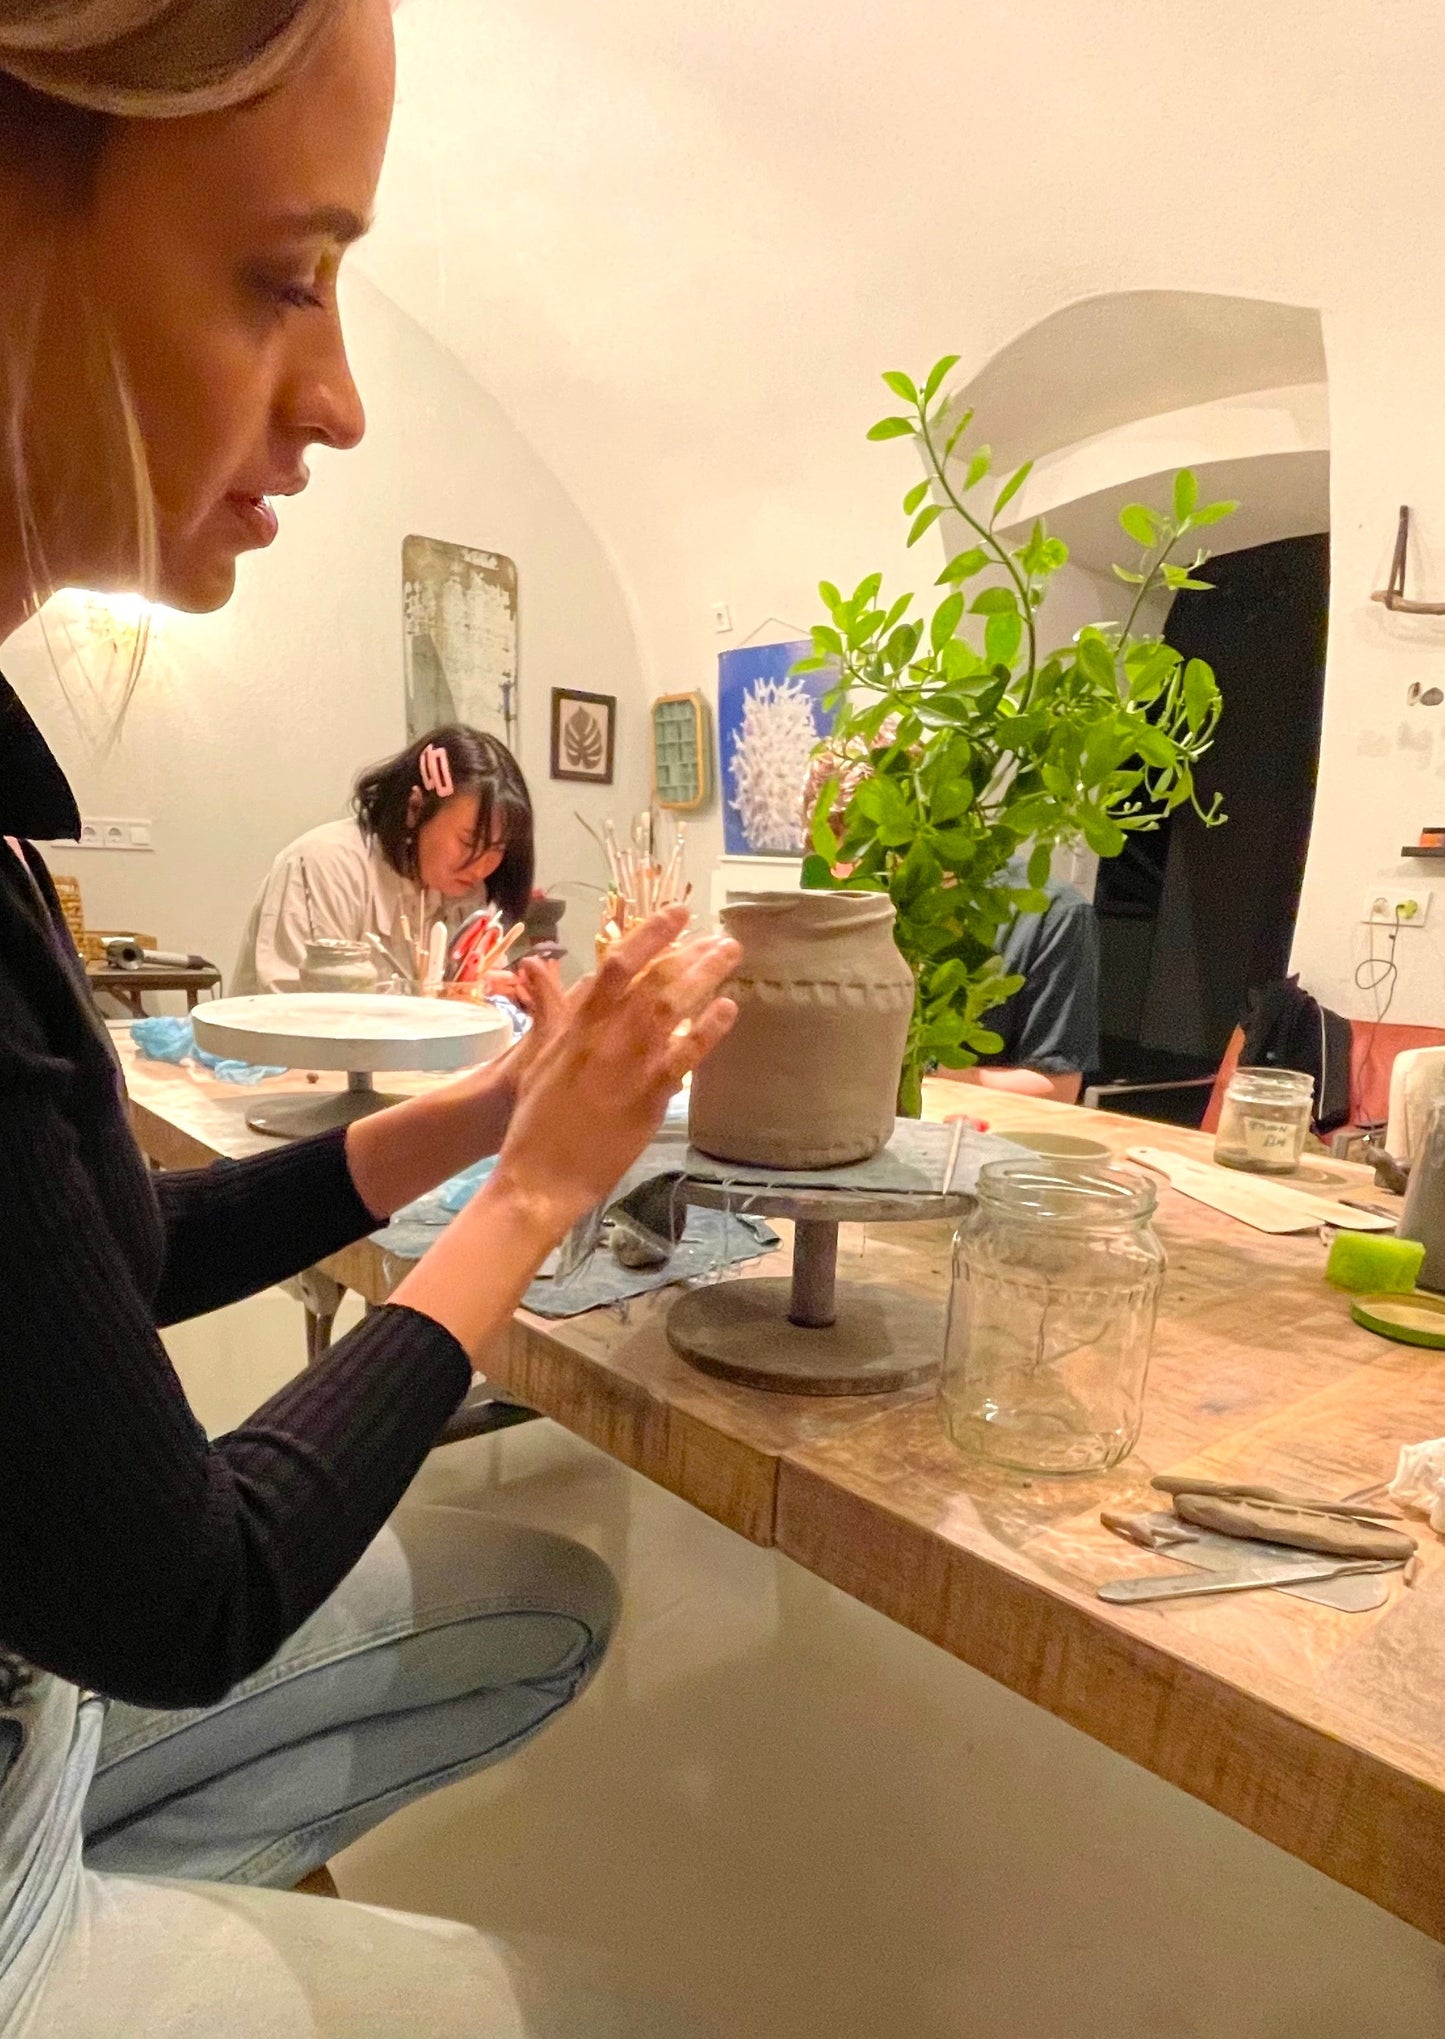 Ceramic Workshop "Freehand and Wheel Pottery" with Brigitta in Budapest, Hungary